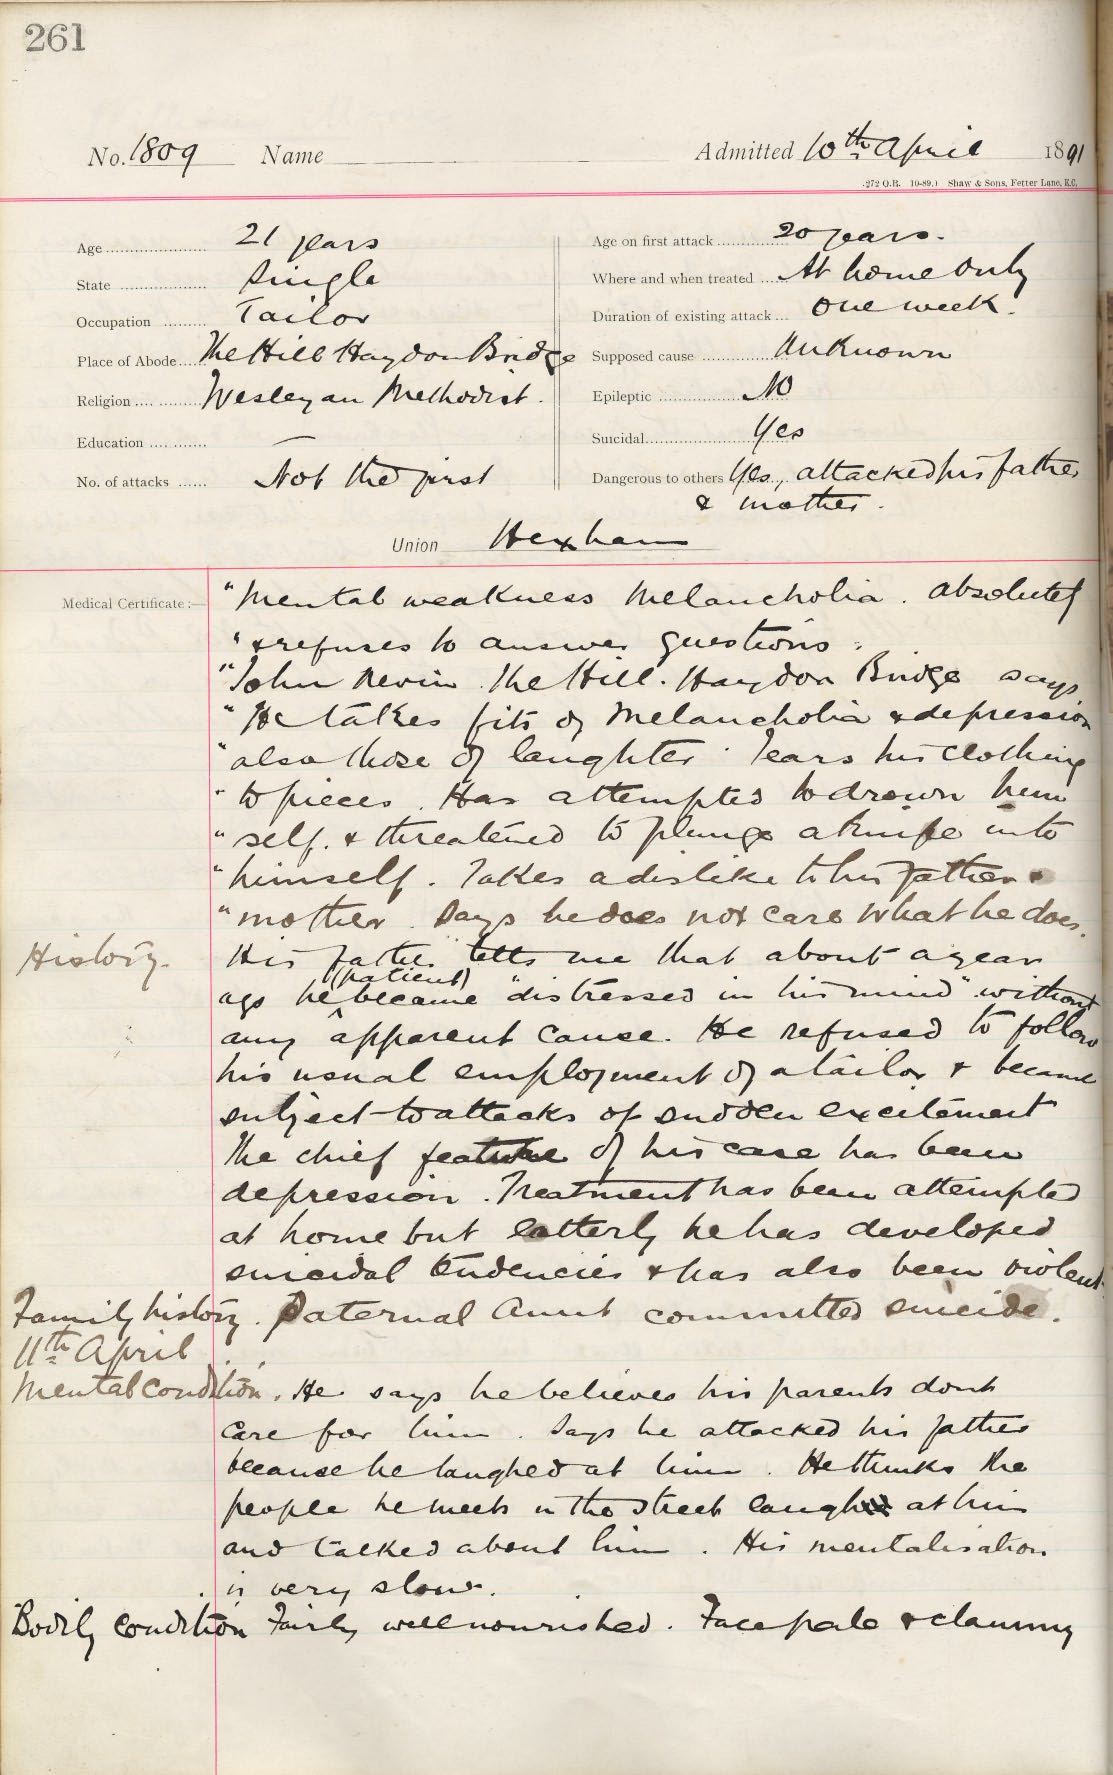 Picture of Morpeth St. George's Patient Case Book